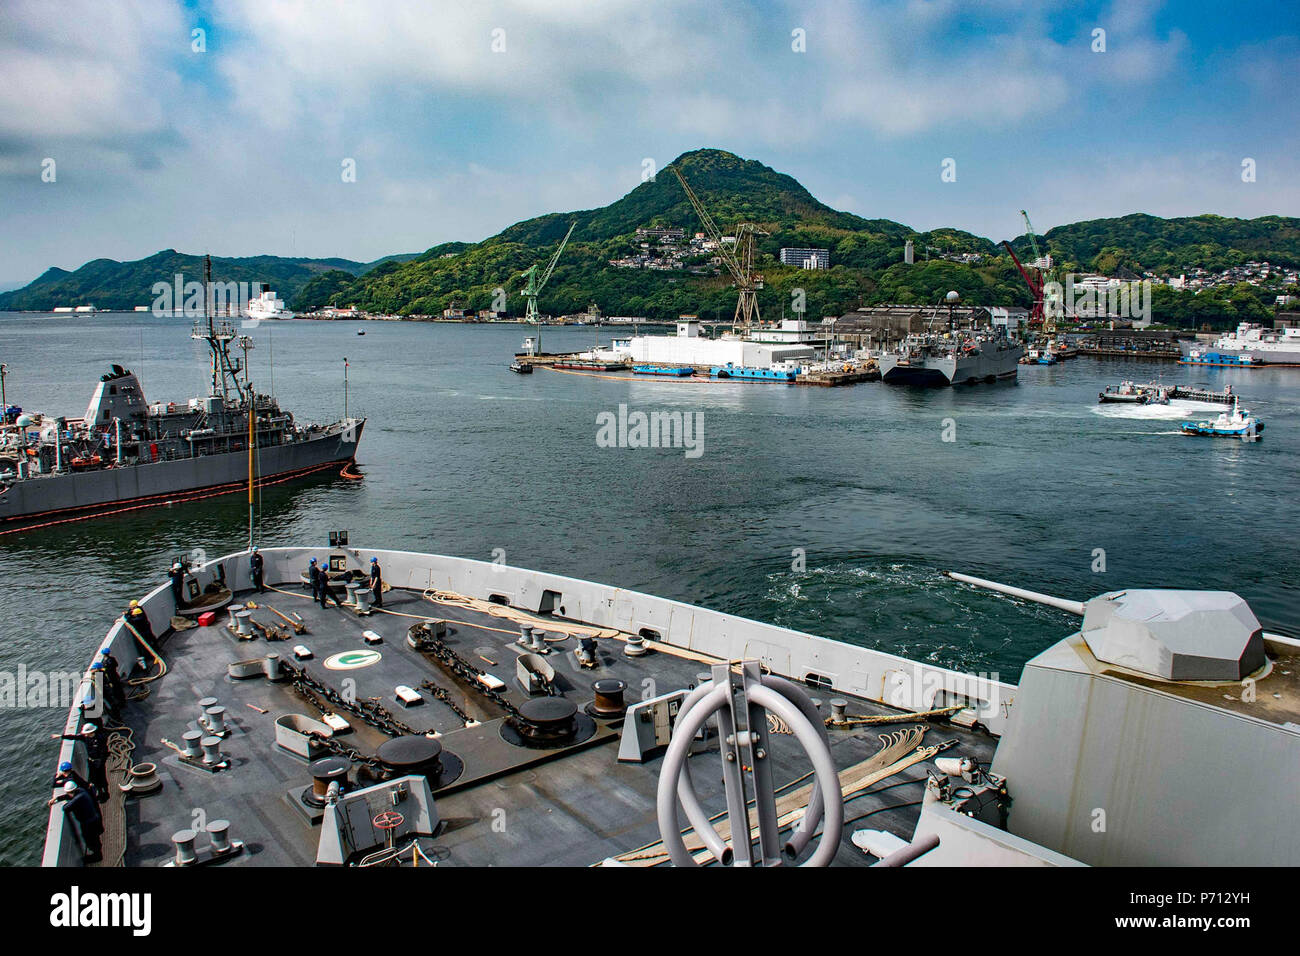 SASEBO, Japan (May 11, 2017) The amphibious transport dock USS Green Bay (LPD 20) returns to its forward-deployed base of Sasebo, Japan during the ship’s Mid-Cycle Inspection (MCI). Green Bay, assigned to Commander, Amphibious Squadron 11, is conducting its MCI, which is conducted at the mid-year point prior to the Board of Inspection and Survey (INSURV) and is used to inspect and assess the material conditions of a ship. Stock Photo